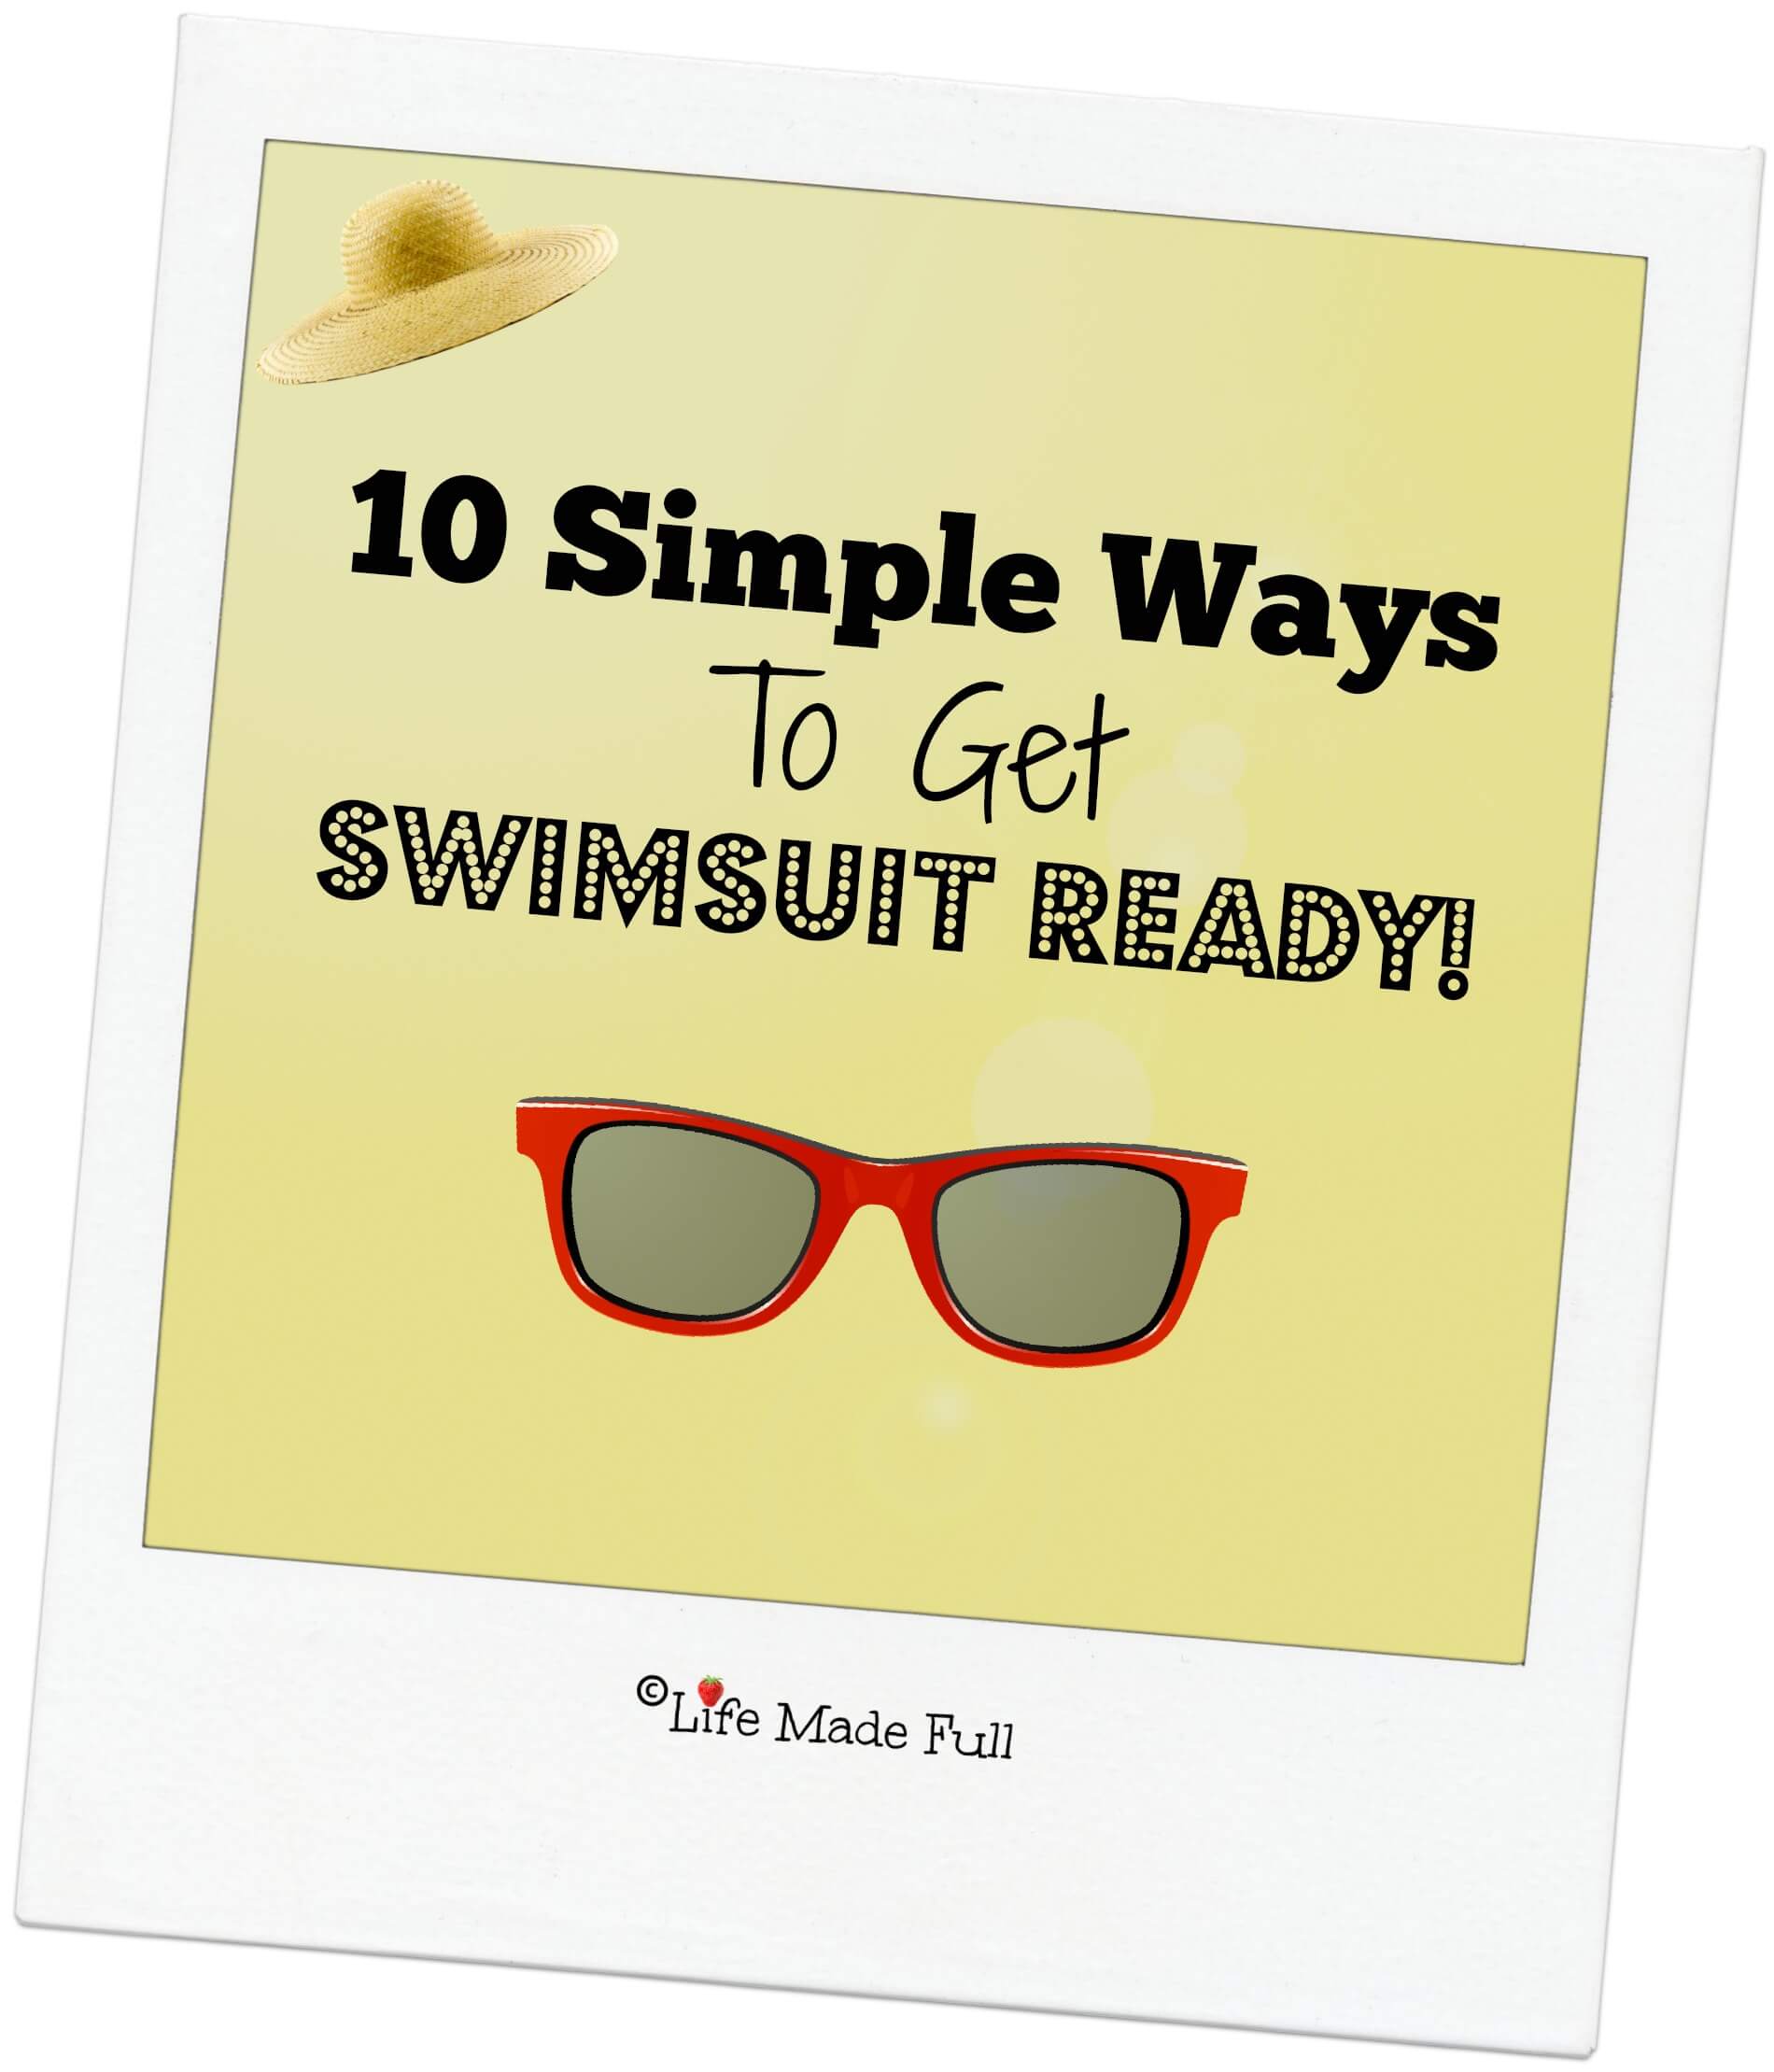 10 Simple Ways to Get Swimsuit Ready!